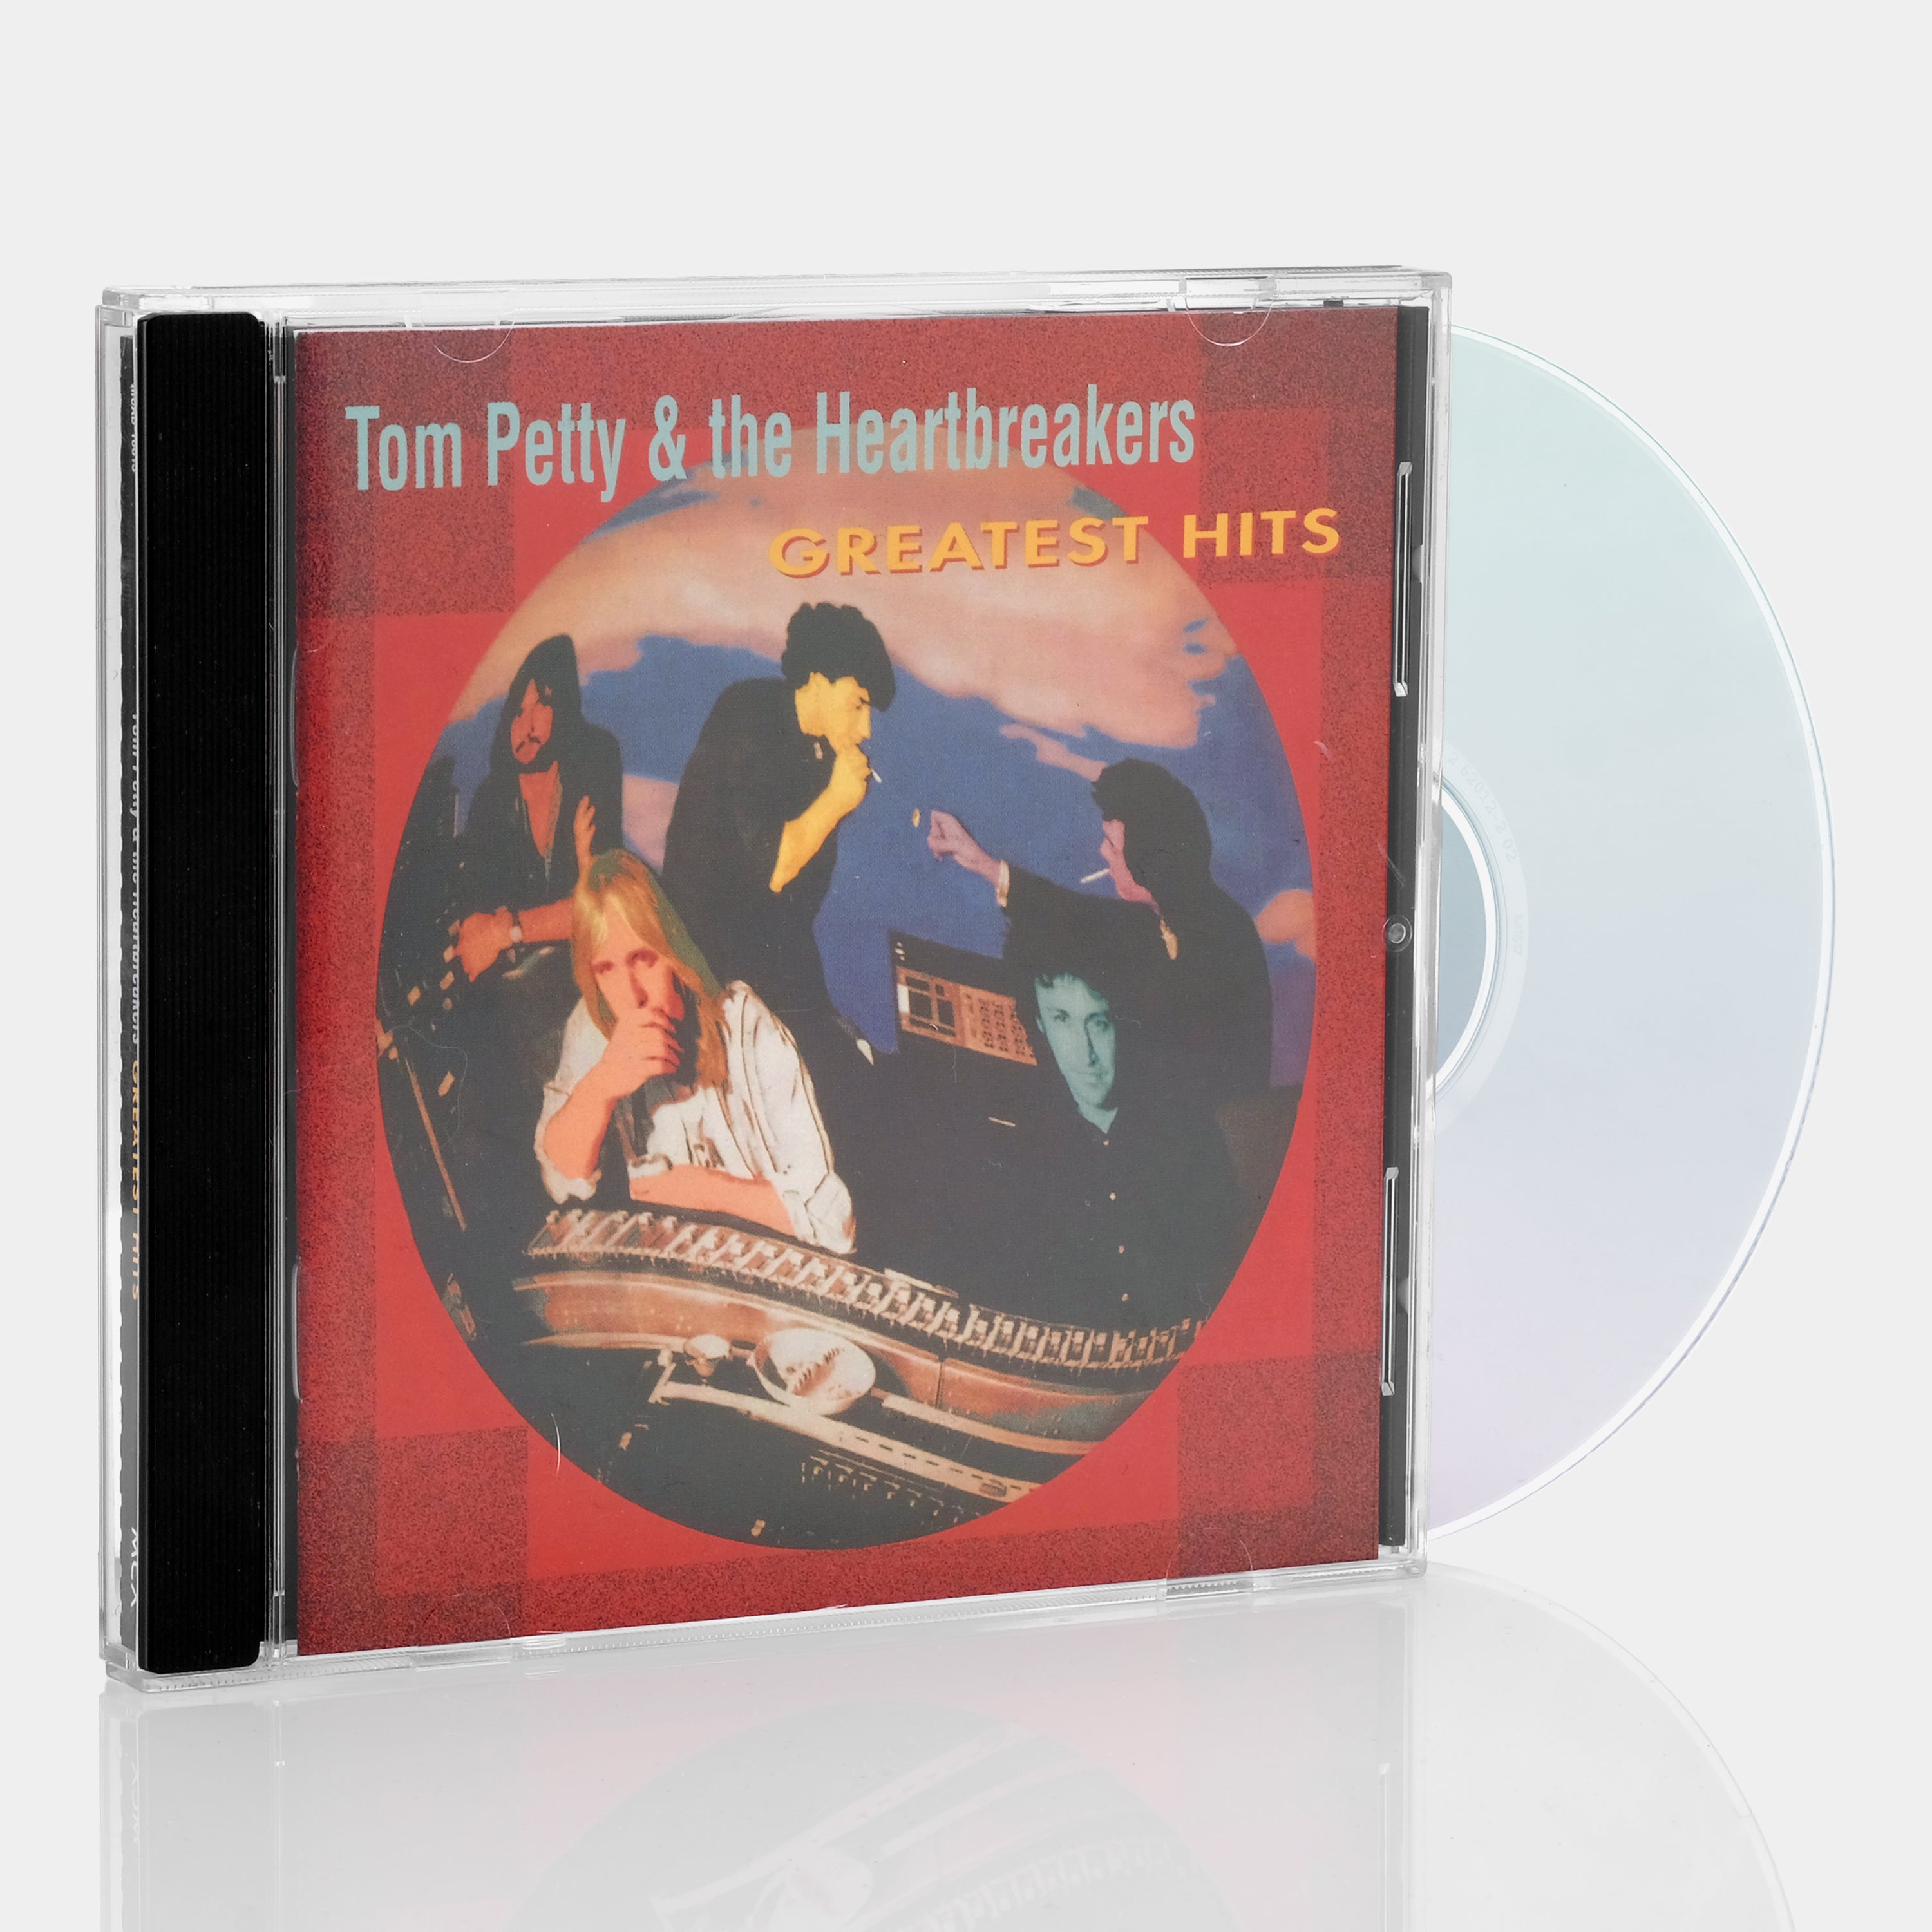 Tom Petty & The Heartbreakers - Greatest Hits CD